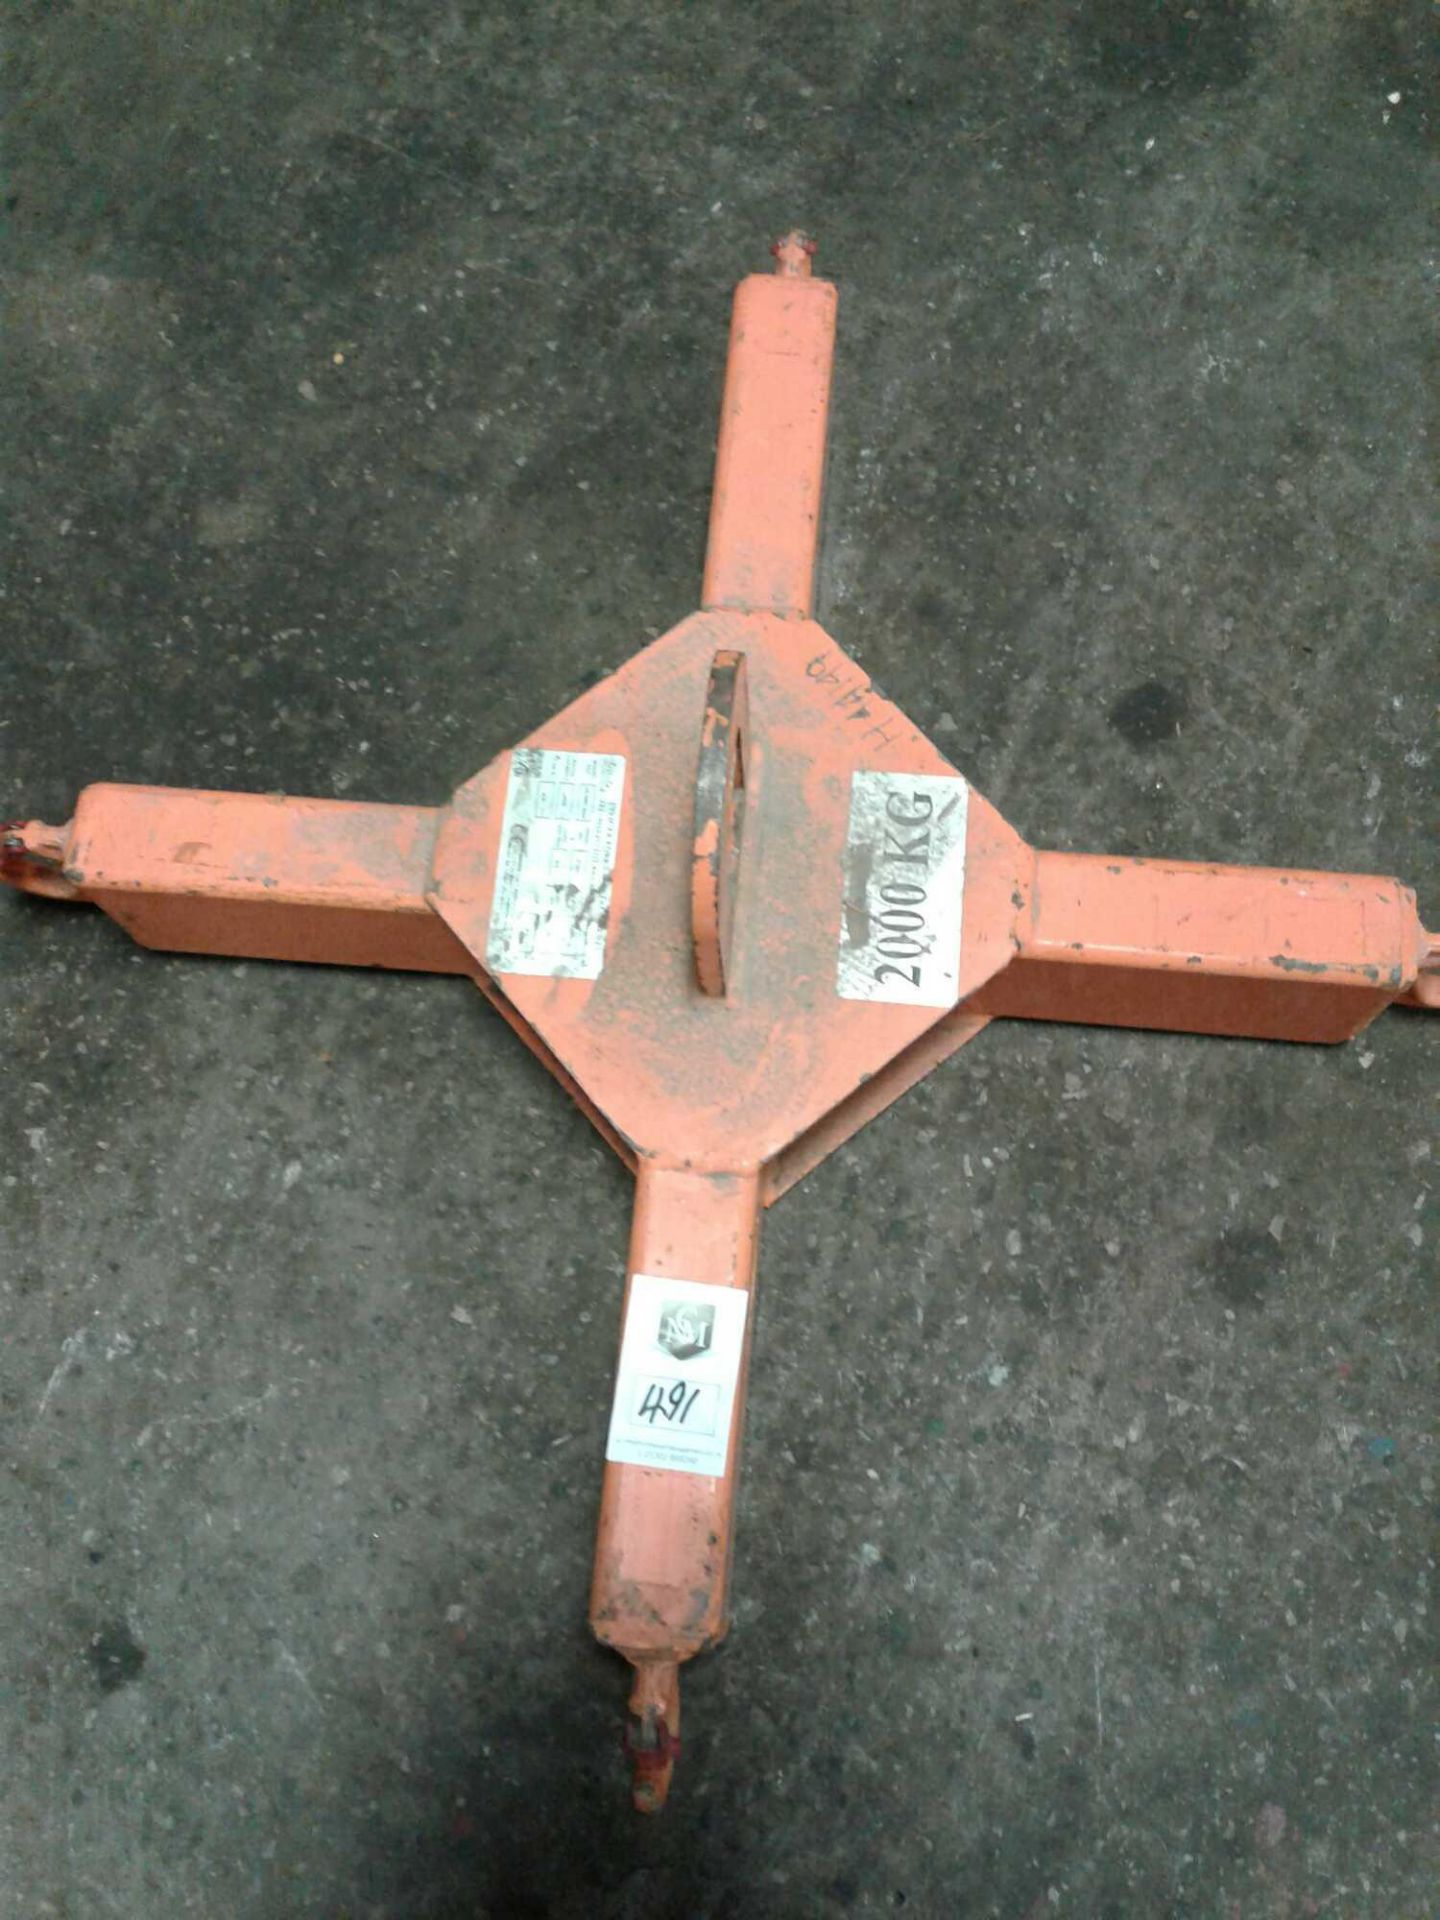 4-point lifting device